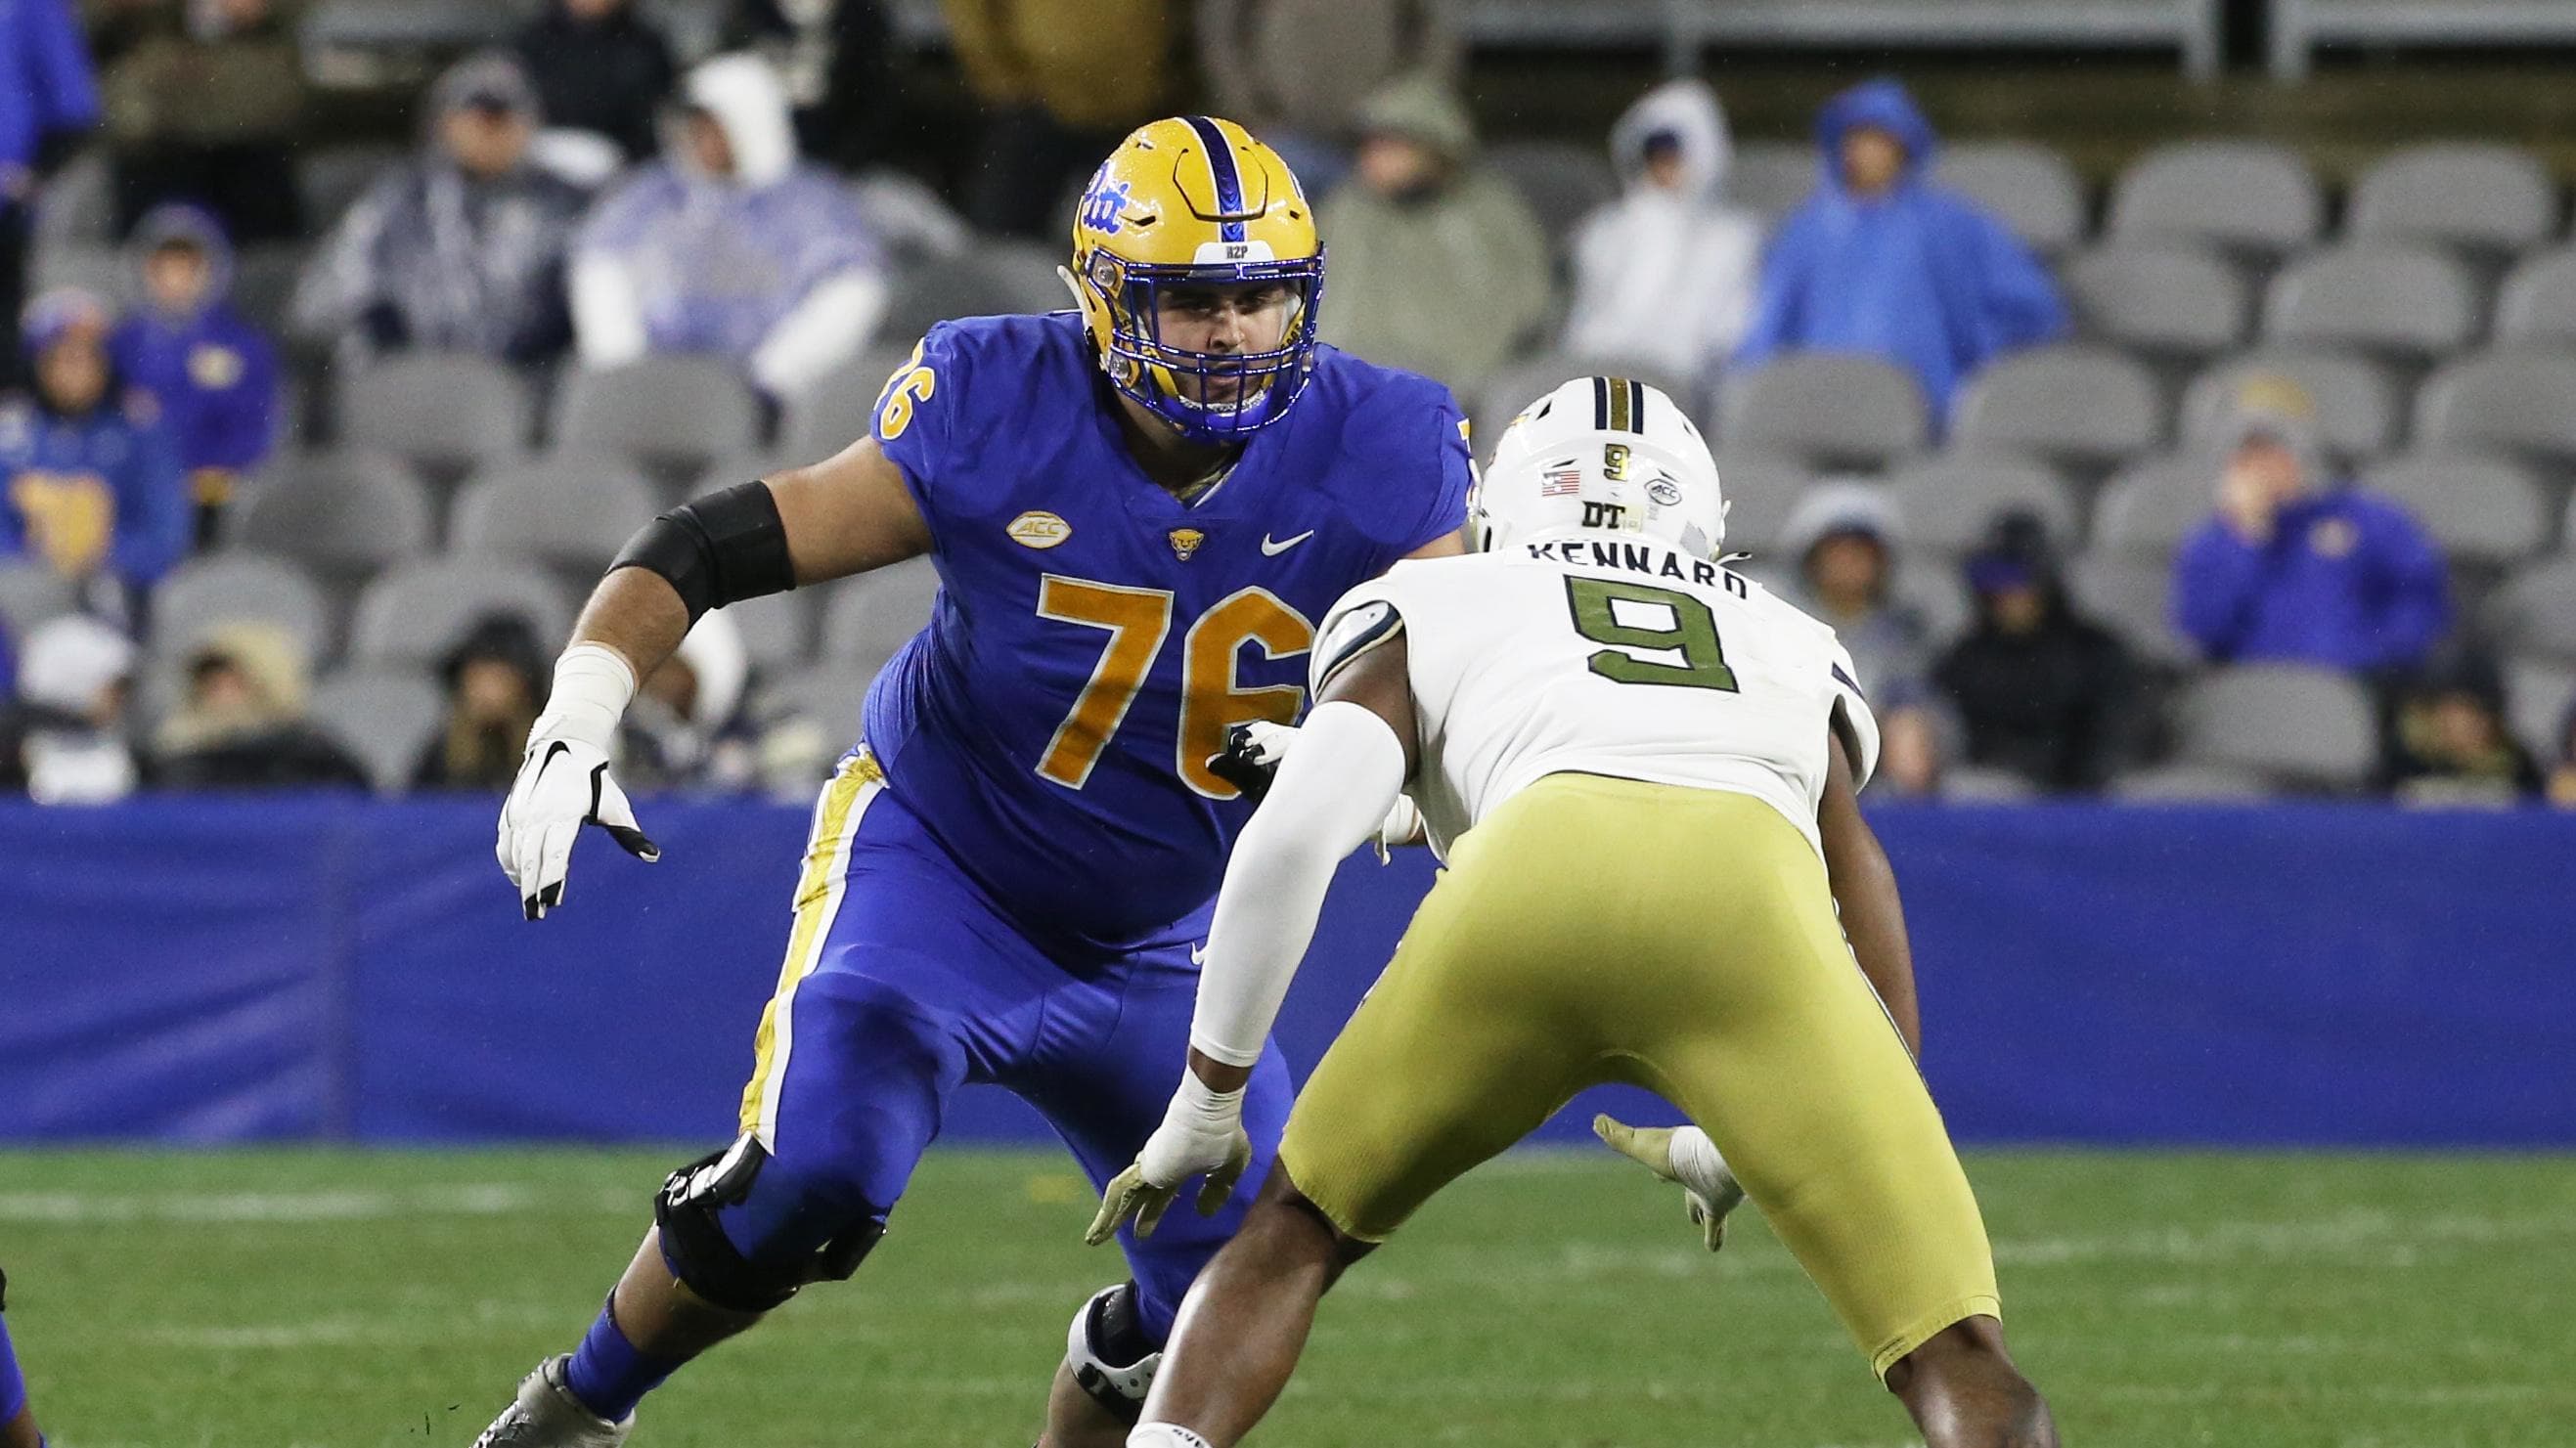 Pitt Panthers OT Matt Goncalves is predicted to go to the Kansas City Chiefs at the end of the 2nd Round of the NFL Draft